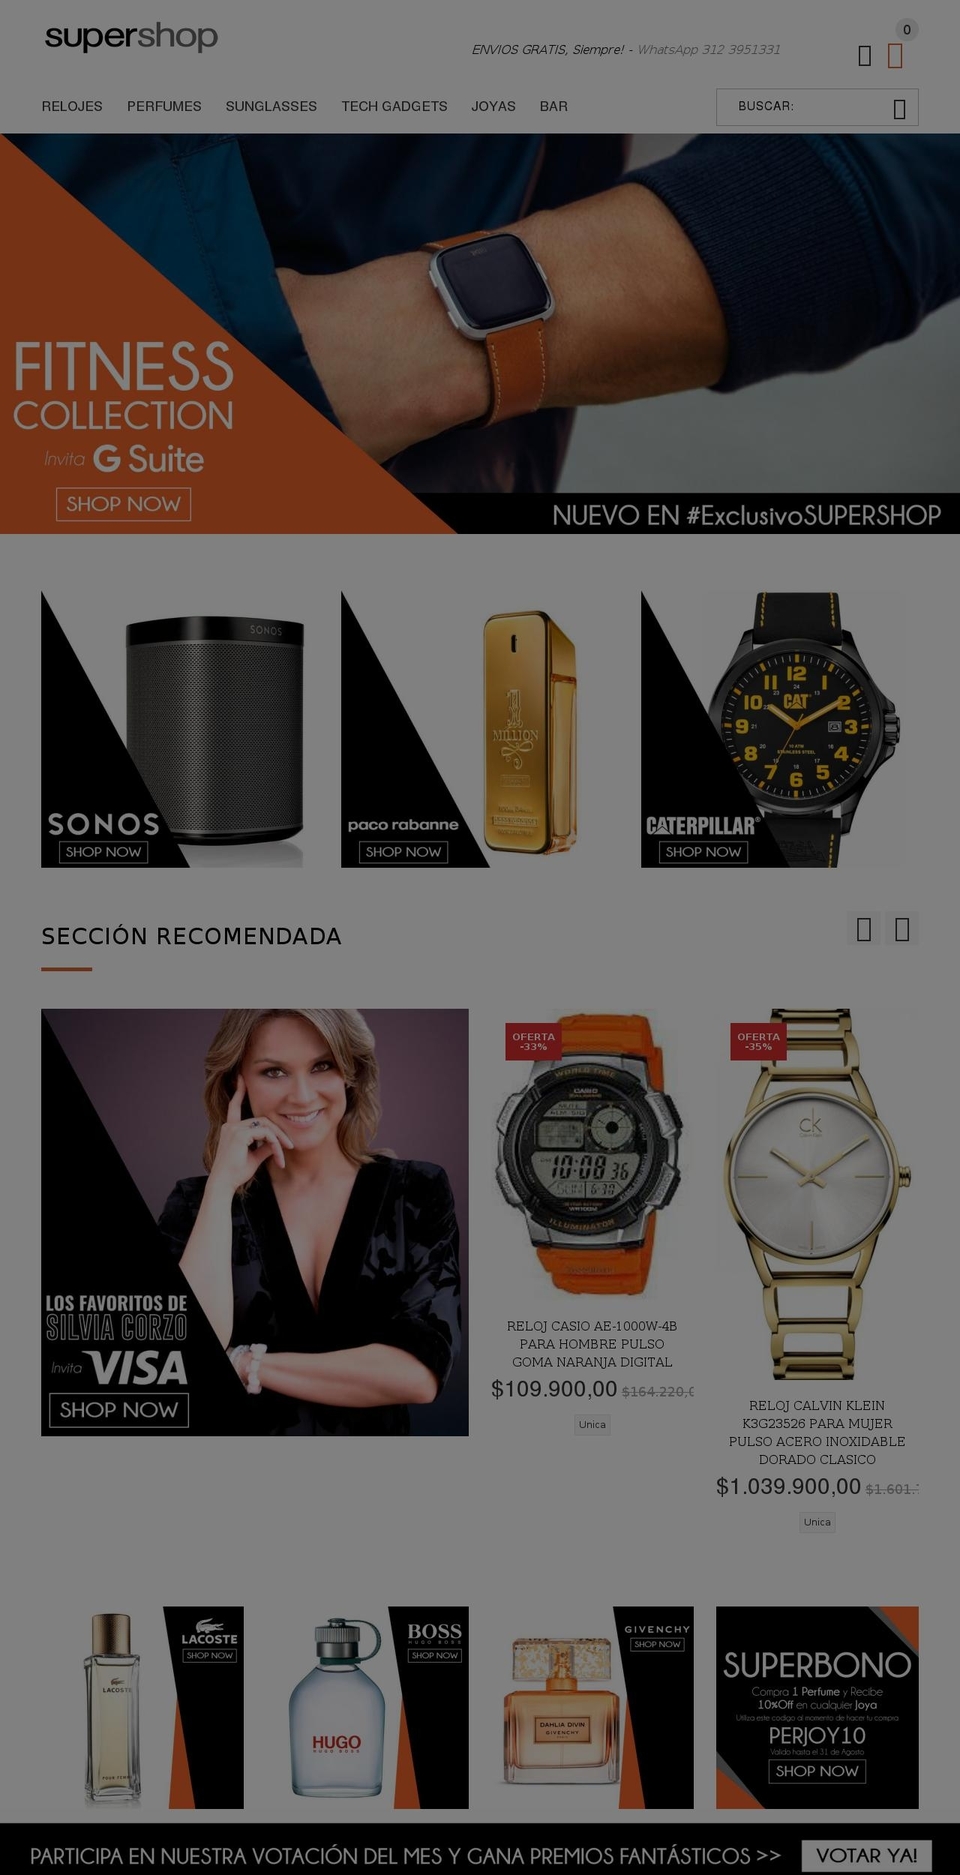 yourstore-v2-1-5 Shopify theme site example supershopcolombia.com